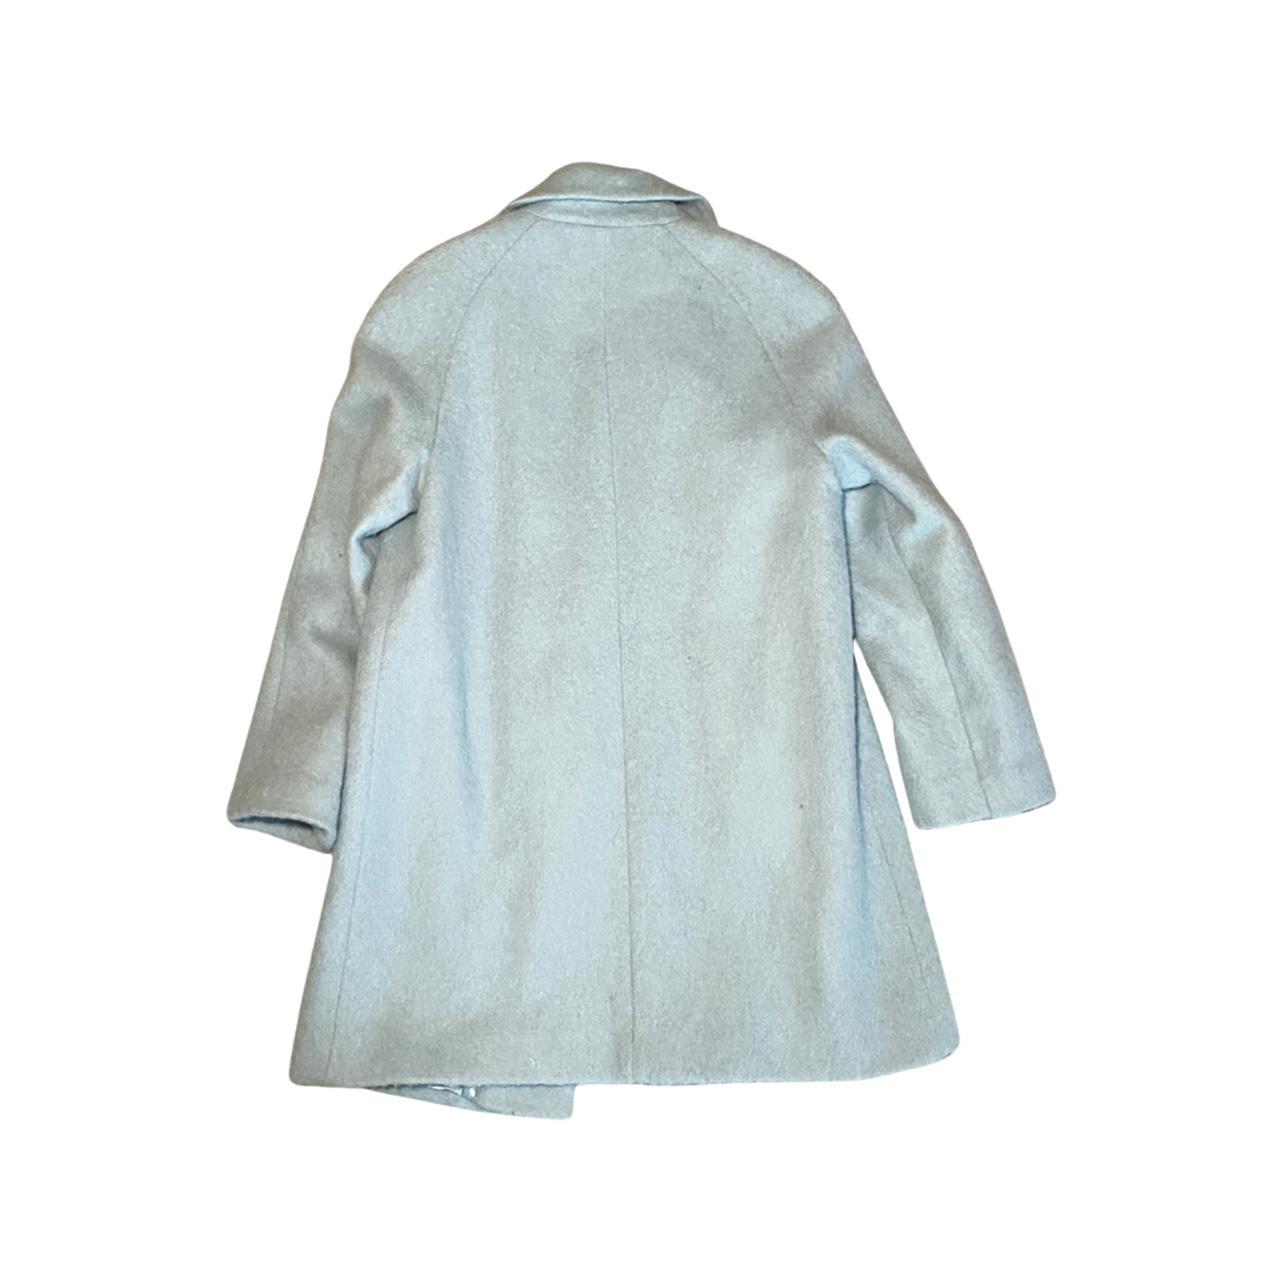 Product Image 2 - Beautiful light blue wool trench